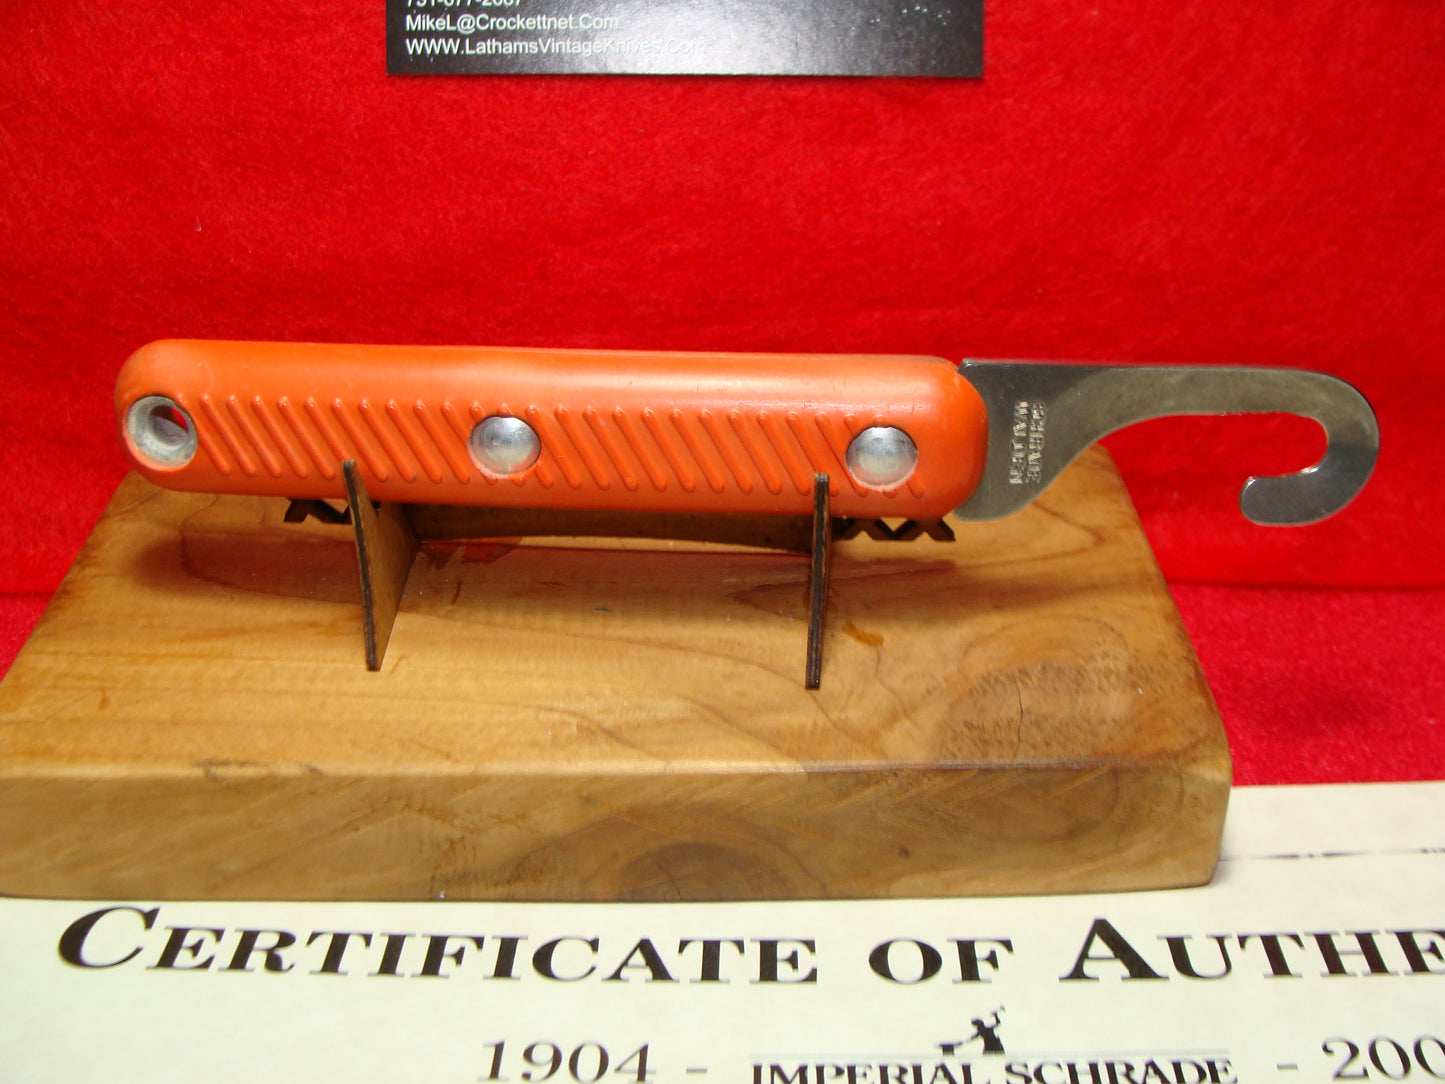 SCHRADE WALDEN 1946-76 FIXED BLADE SHROUD CUTTER NON AUTOMATIC MILITARY ORANGE DELRIN HANDLES PART OF THE SCHRADE FACTORY COLLECTION